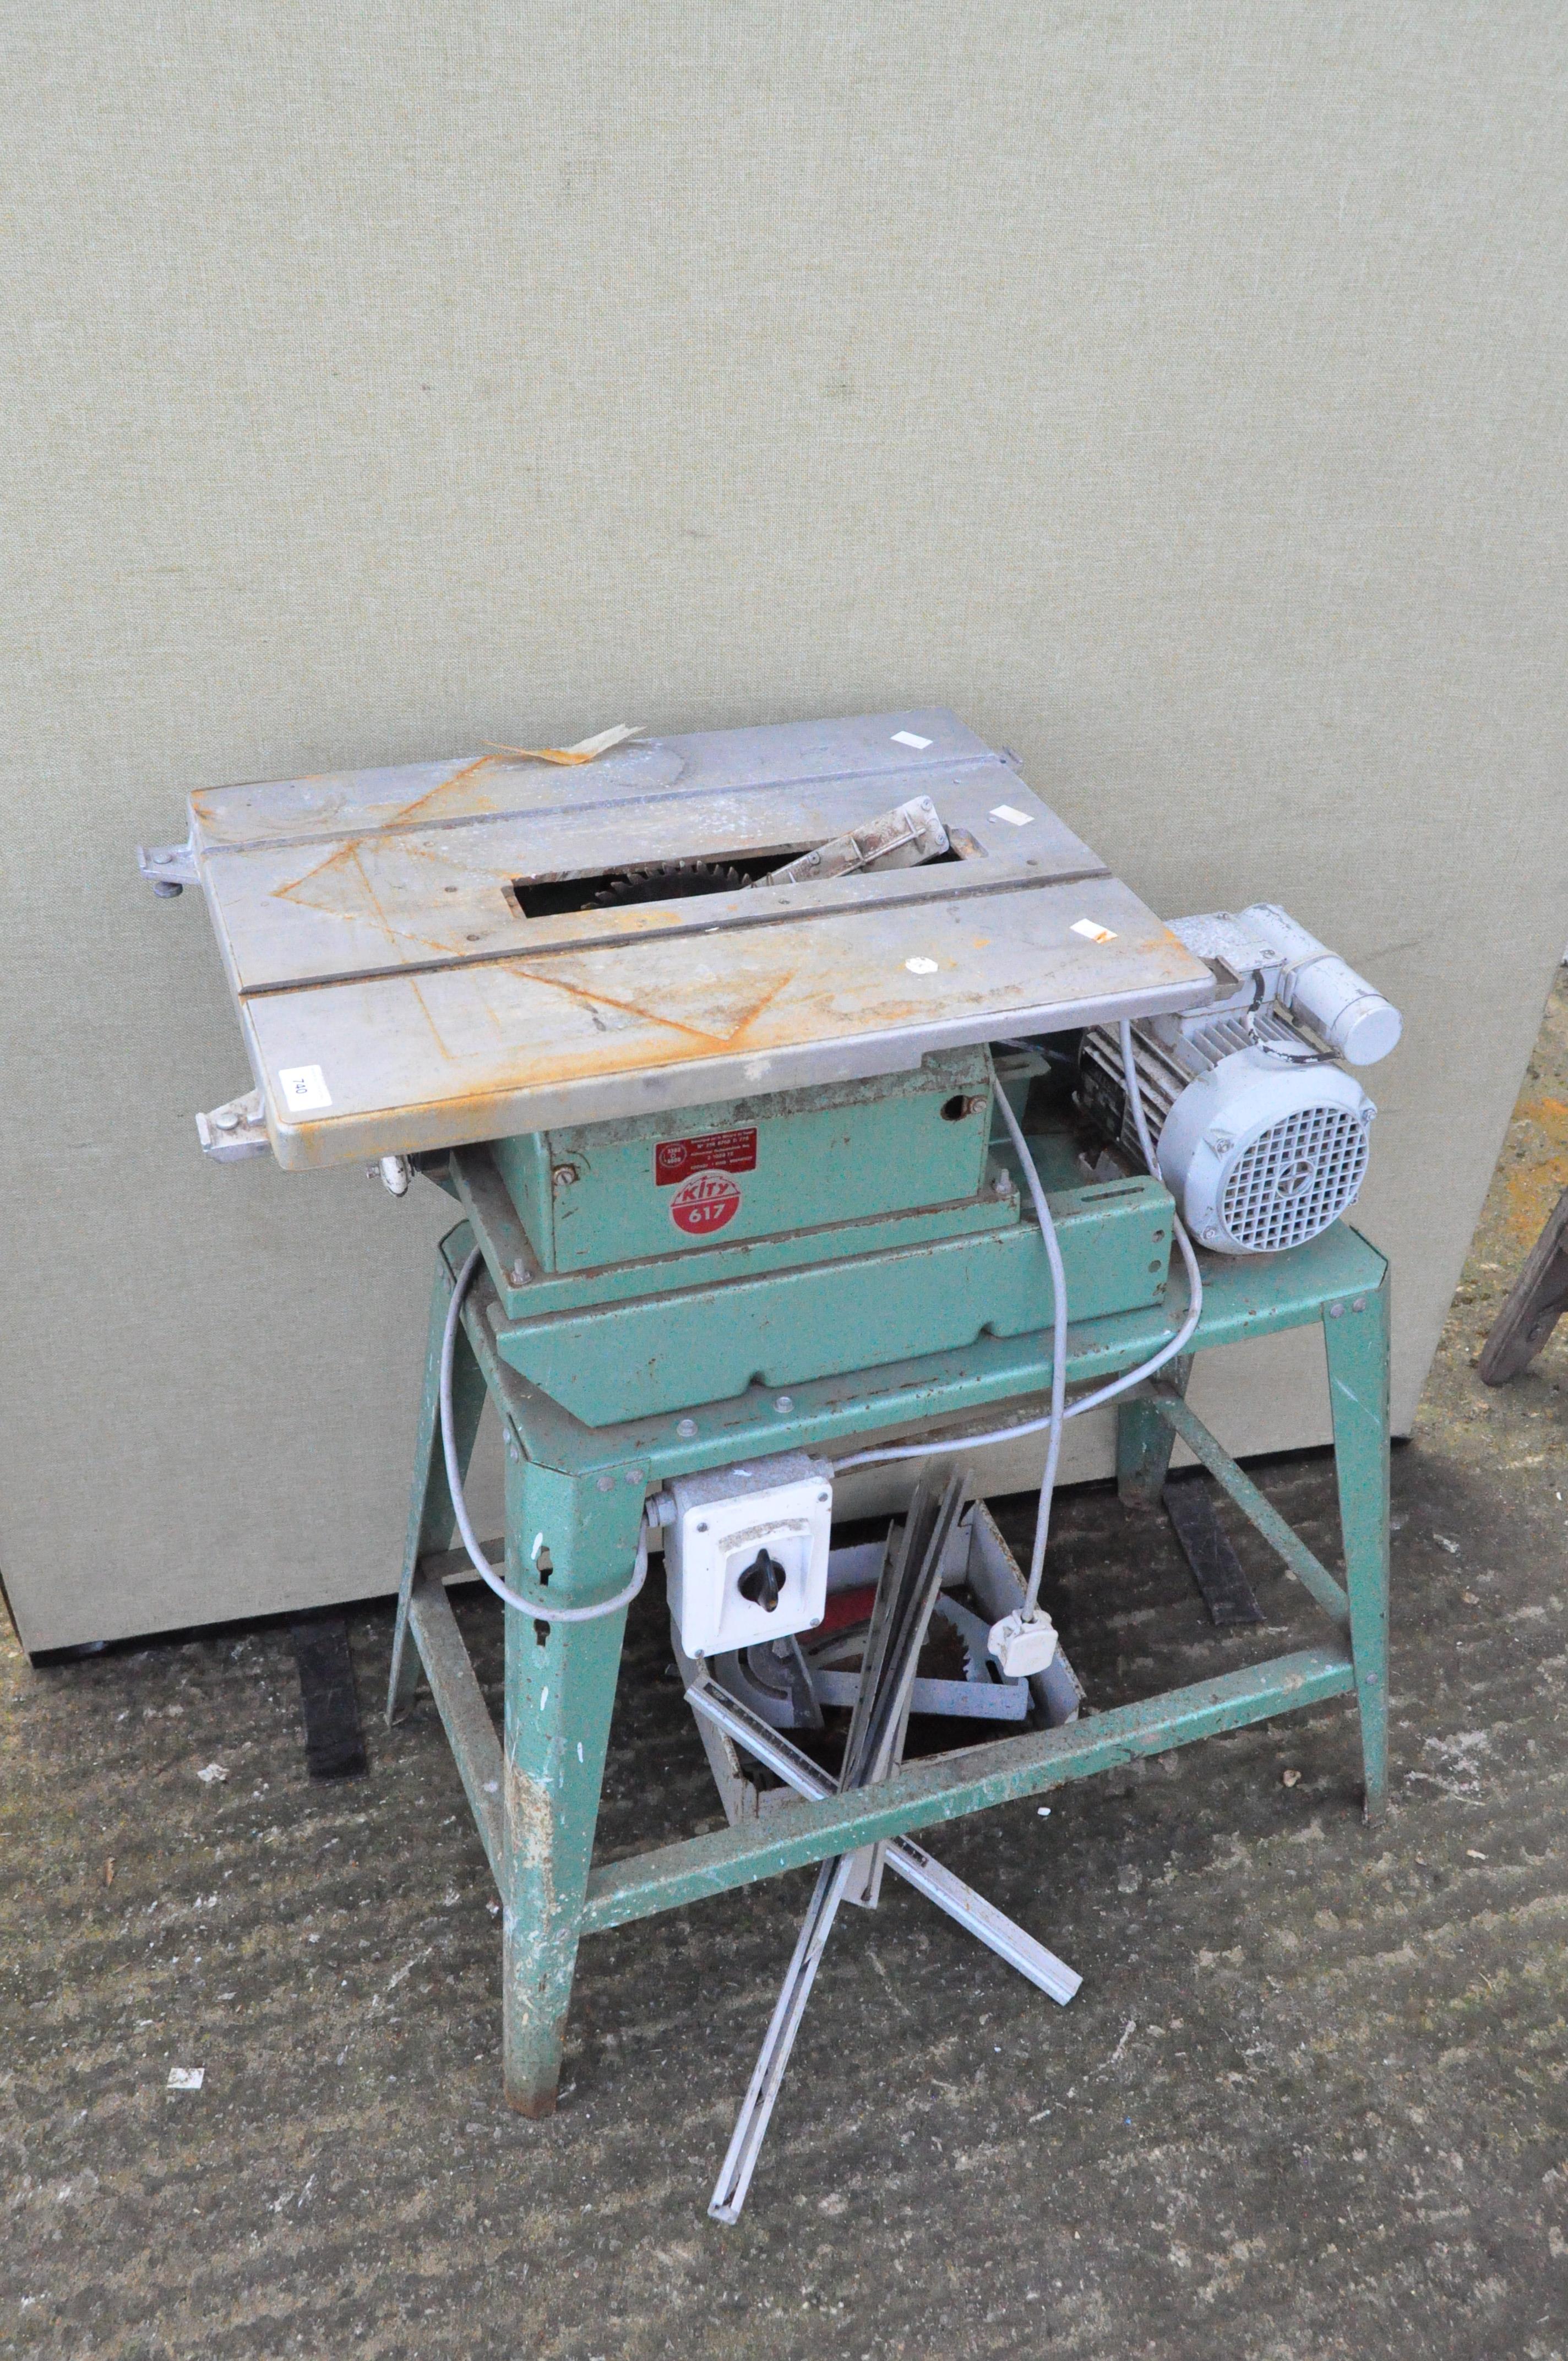 A Kity 617 mains electric saw bench on stand,